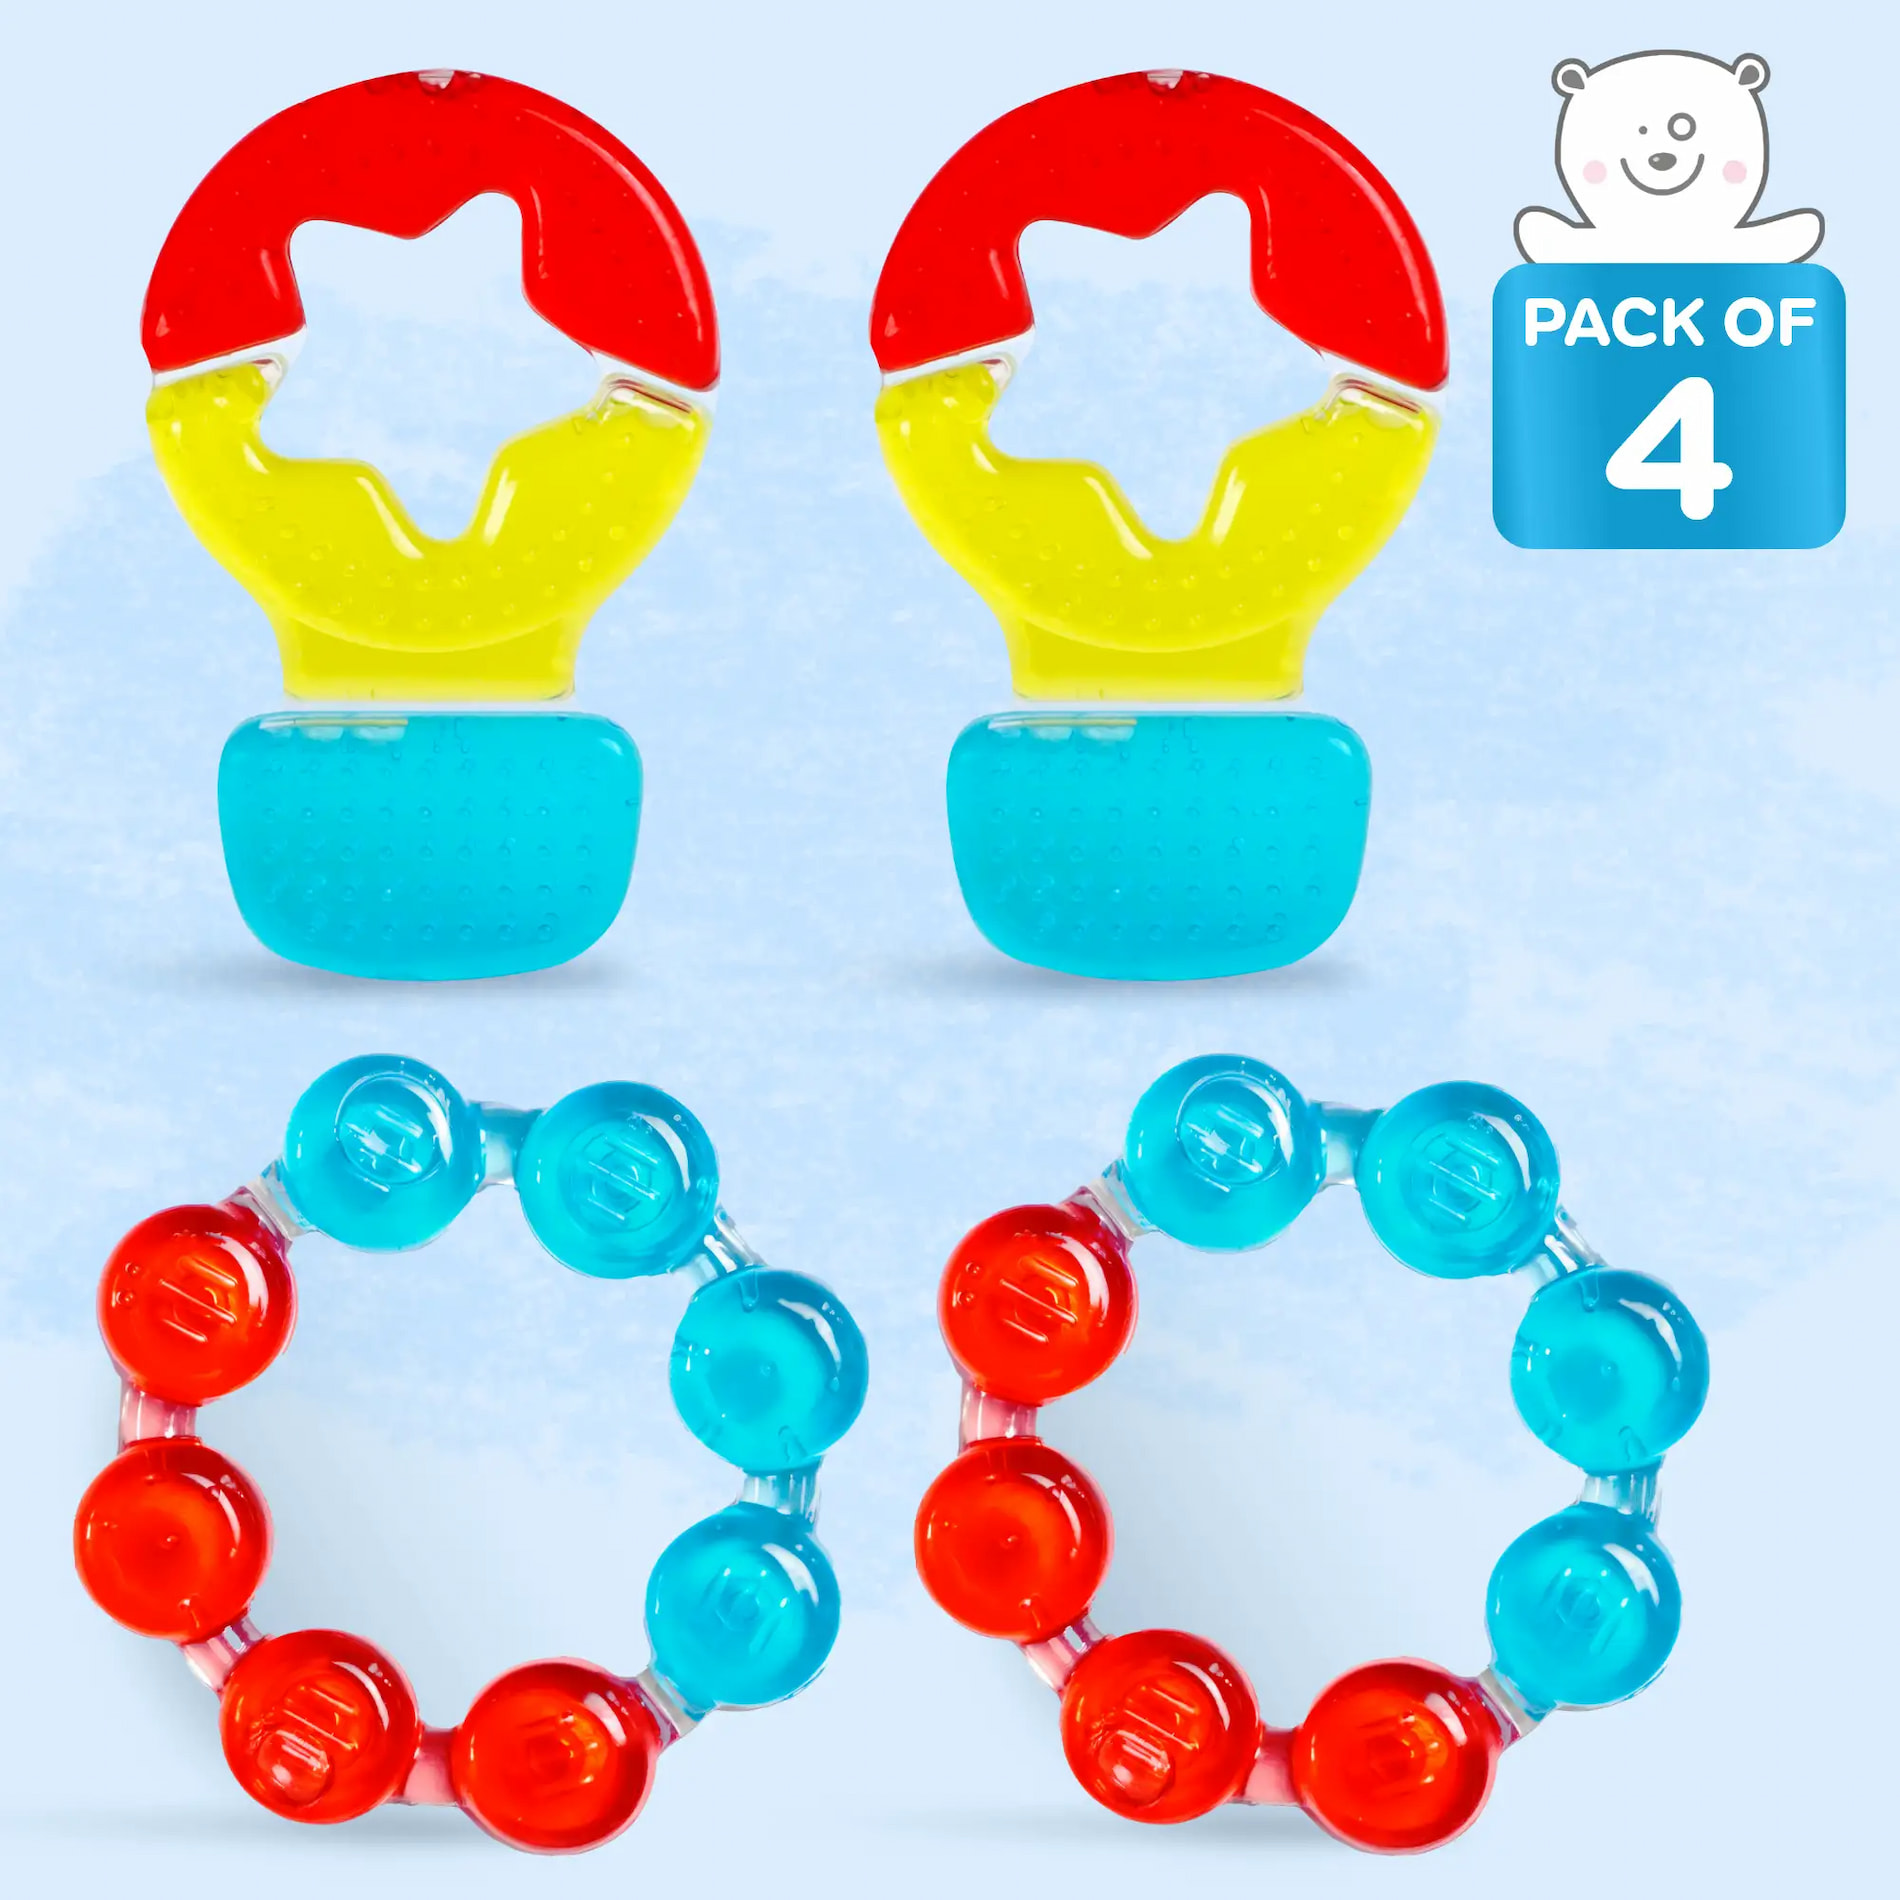 Teether for Kids PO4 - 2 Ring + 2 Hot Air Balloon